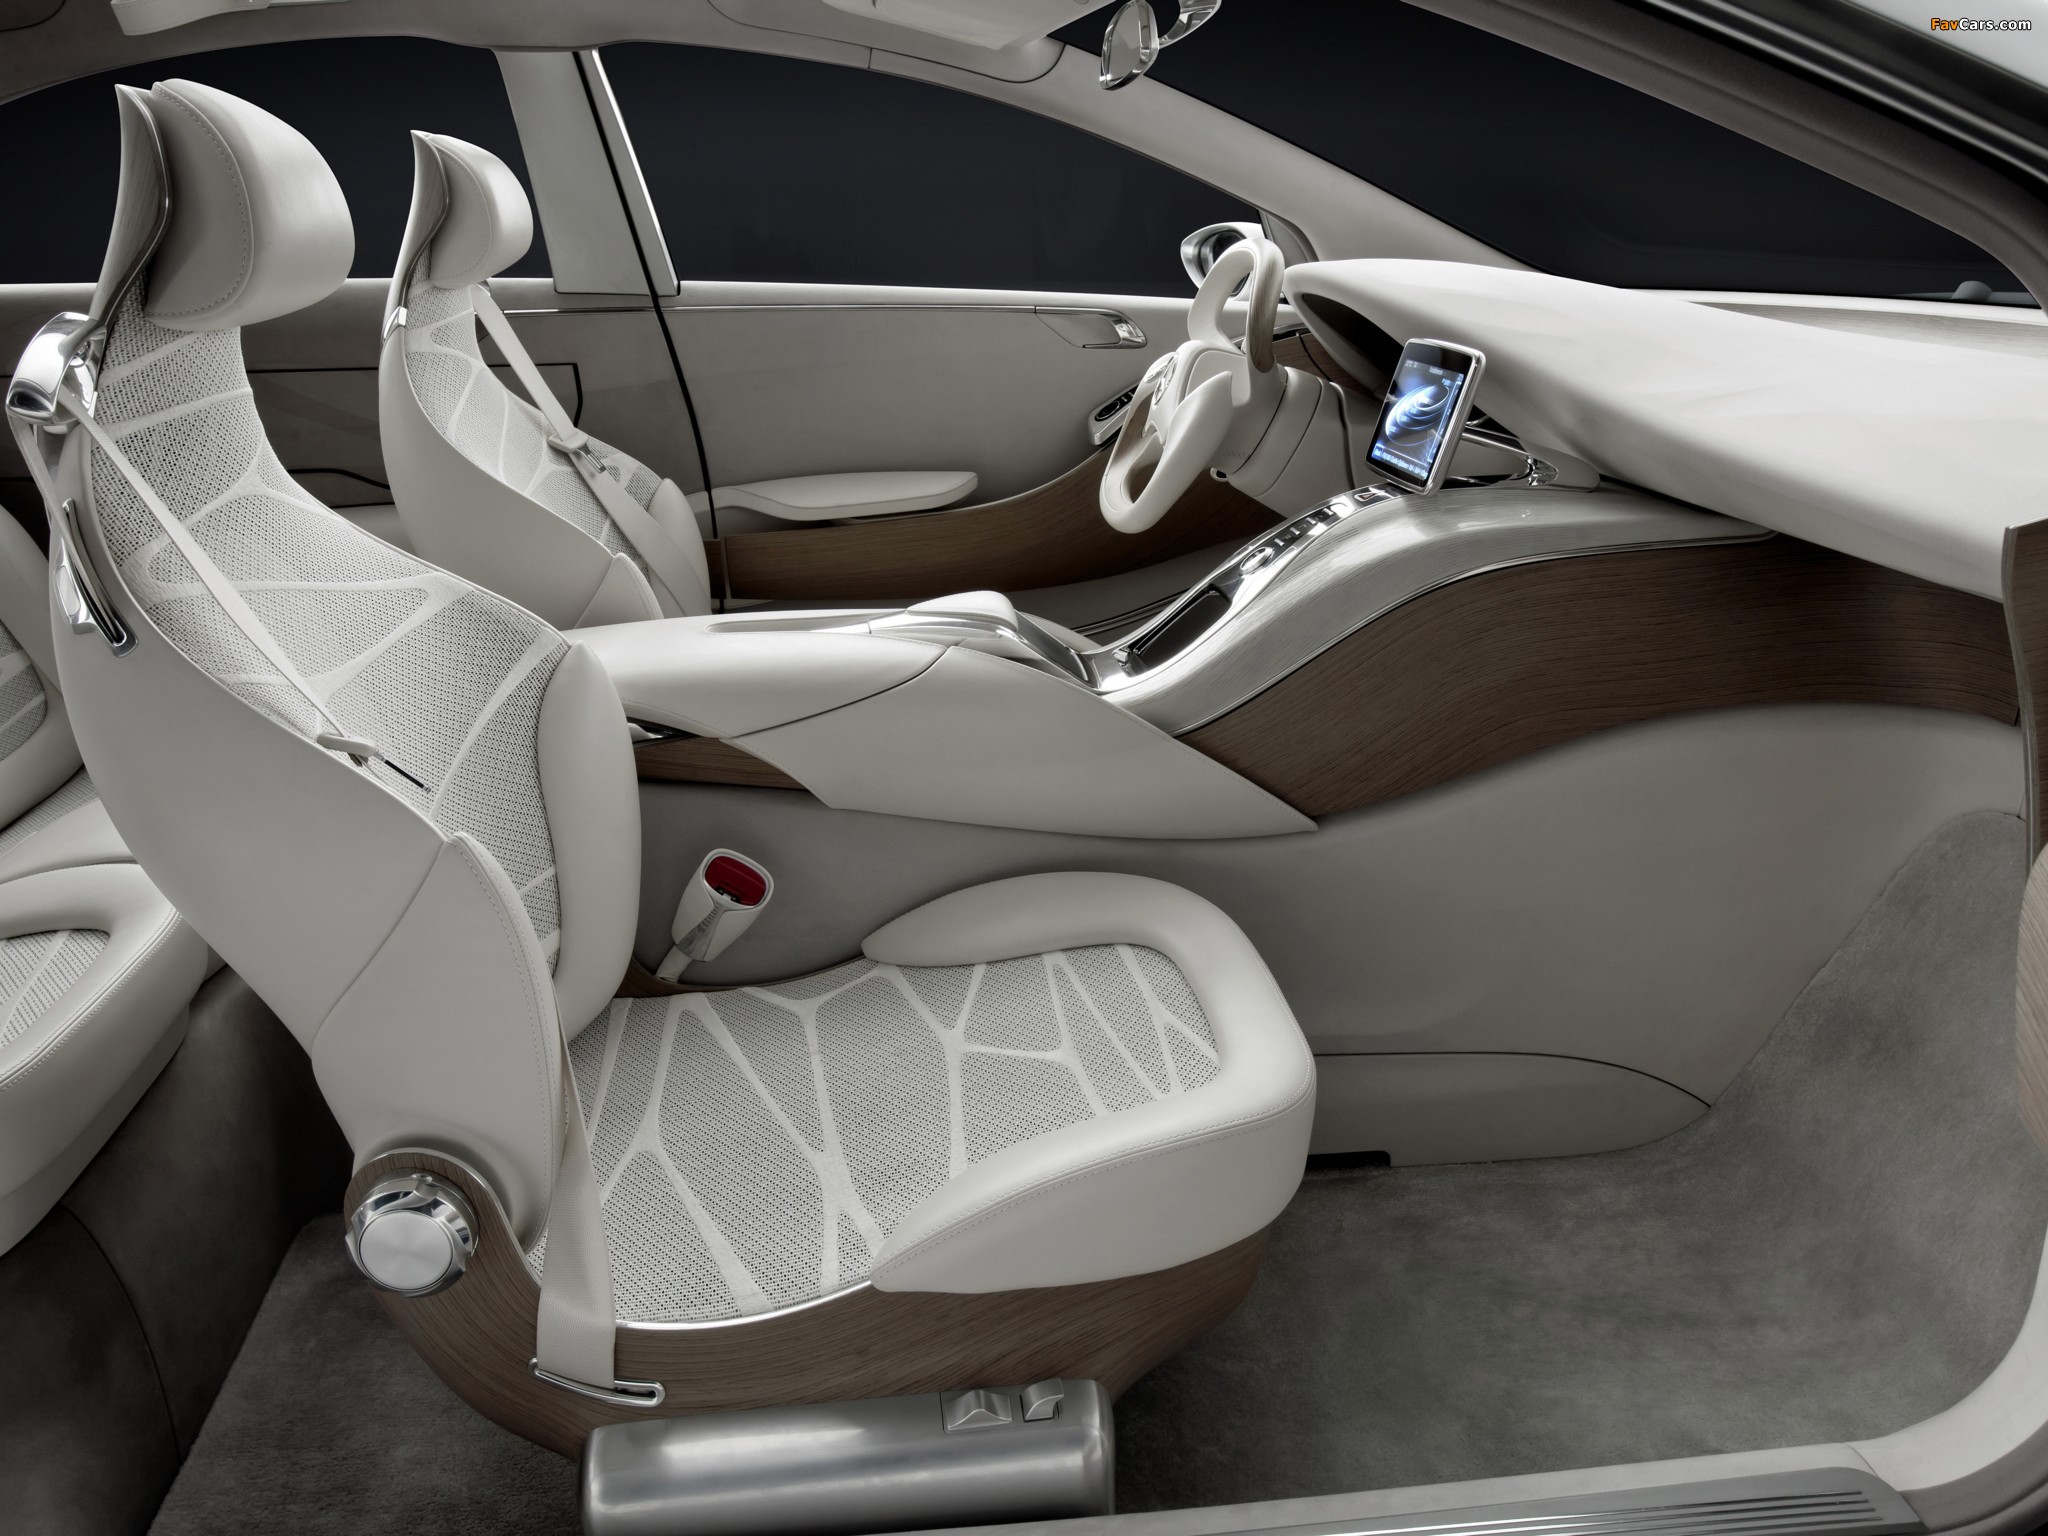 Mercedes-Benz F800 Style Concept 2010 pictures (2048 x 1536)